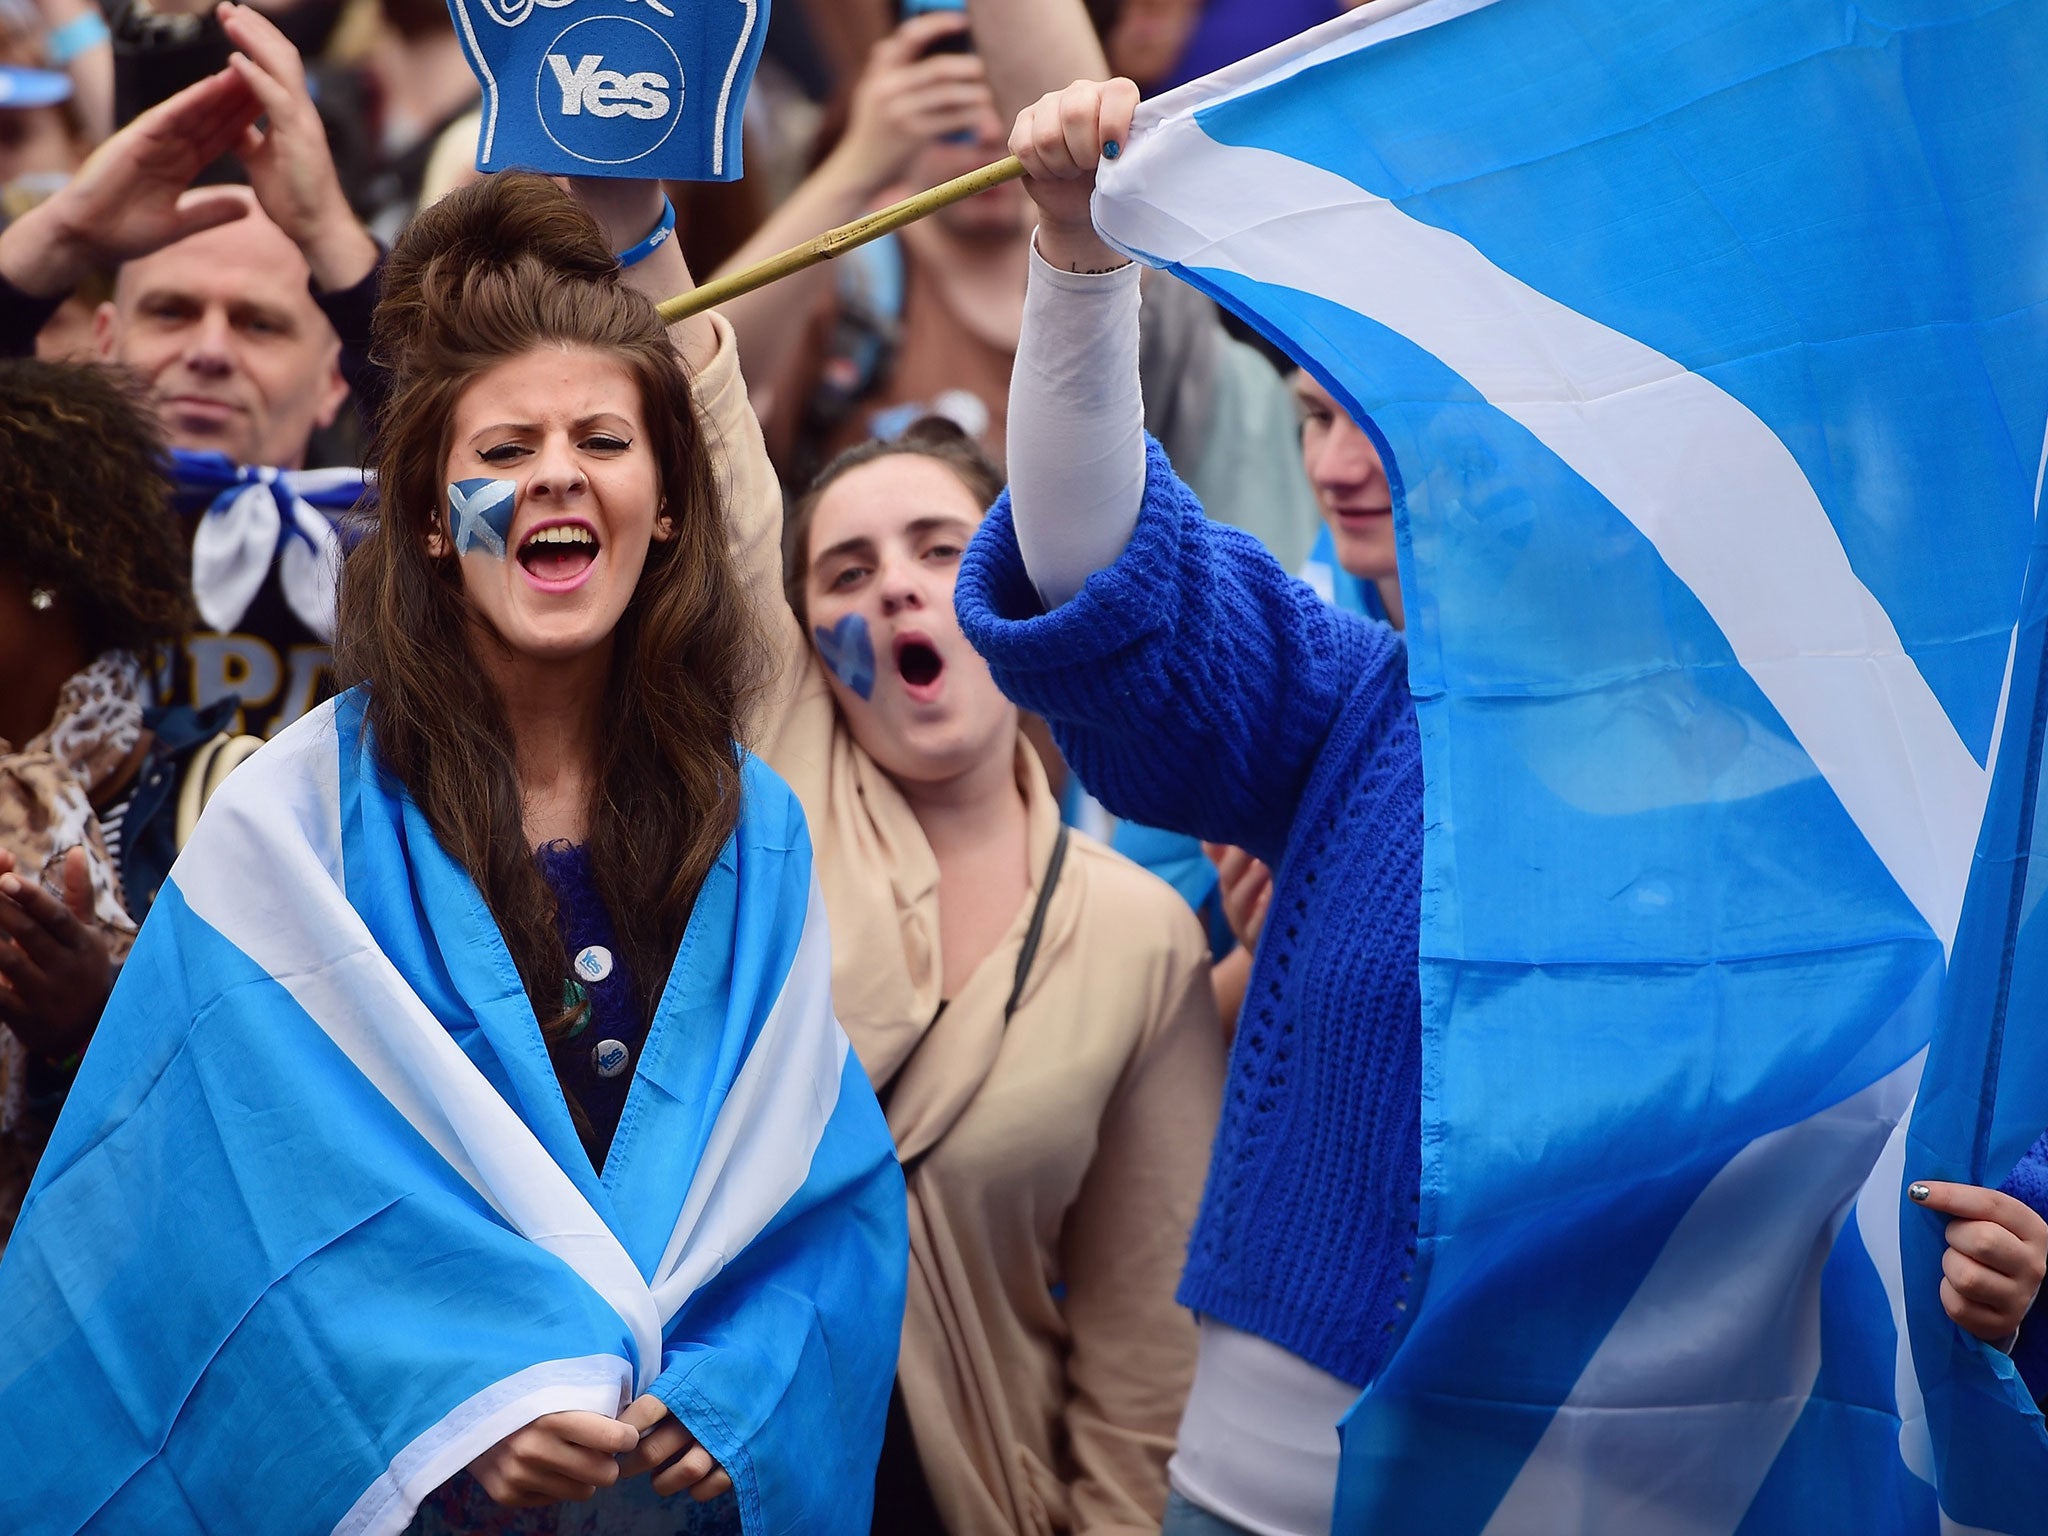 Yes activists gather in George Square on September 17, 2014 in Glasgow, Scotland